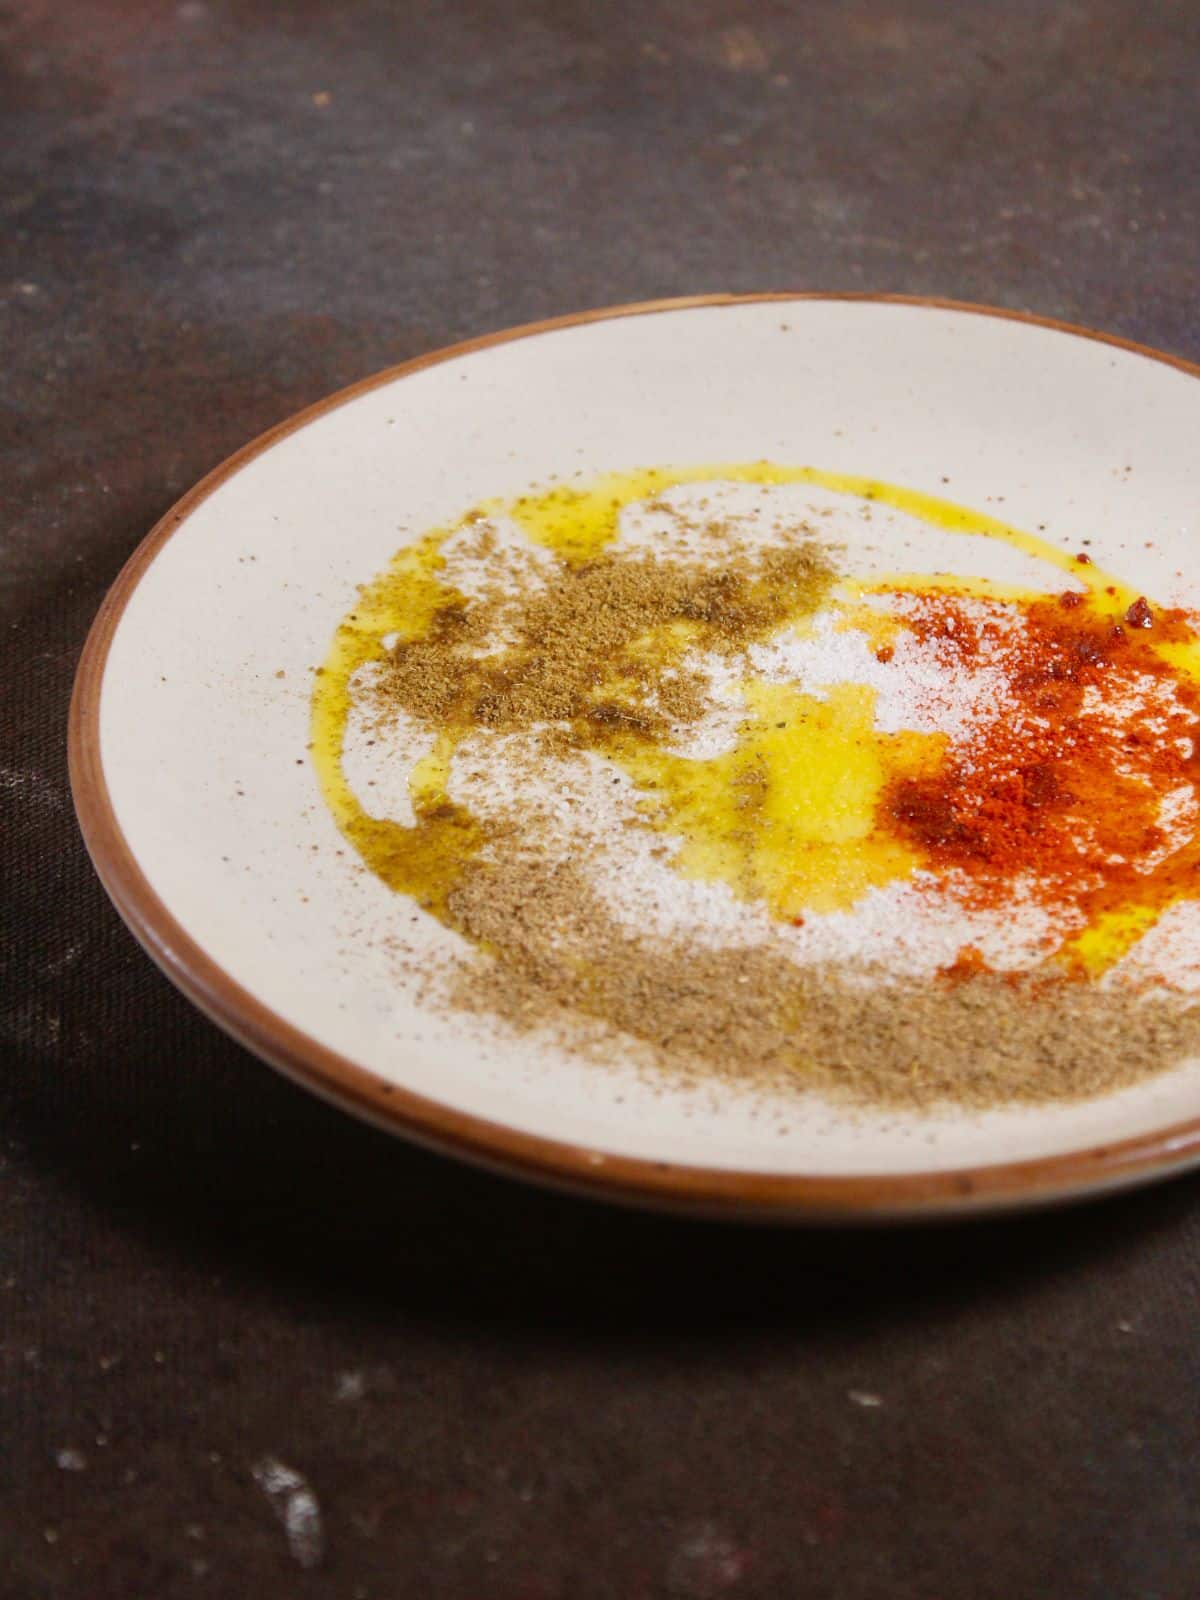 take mustard oil with powdered spices on a plate 